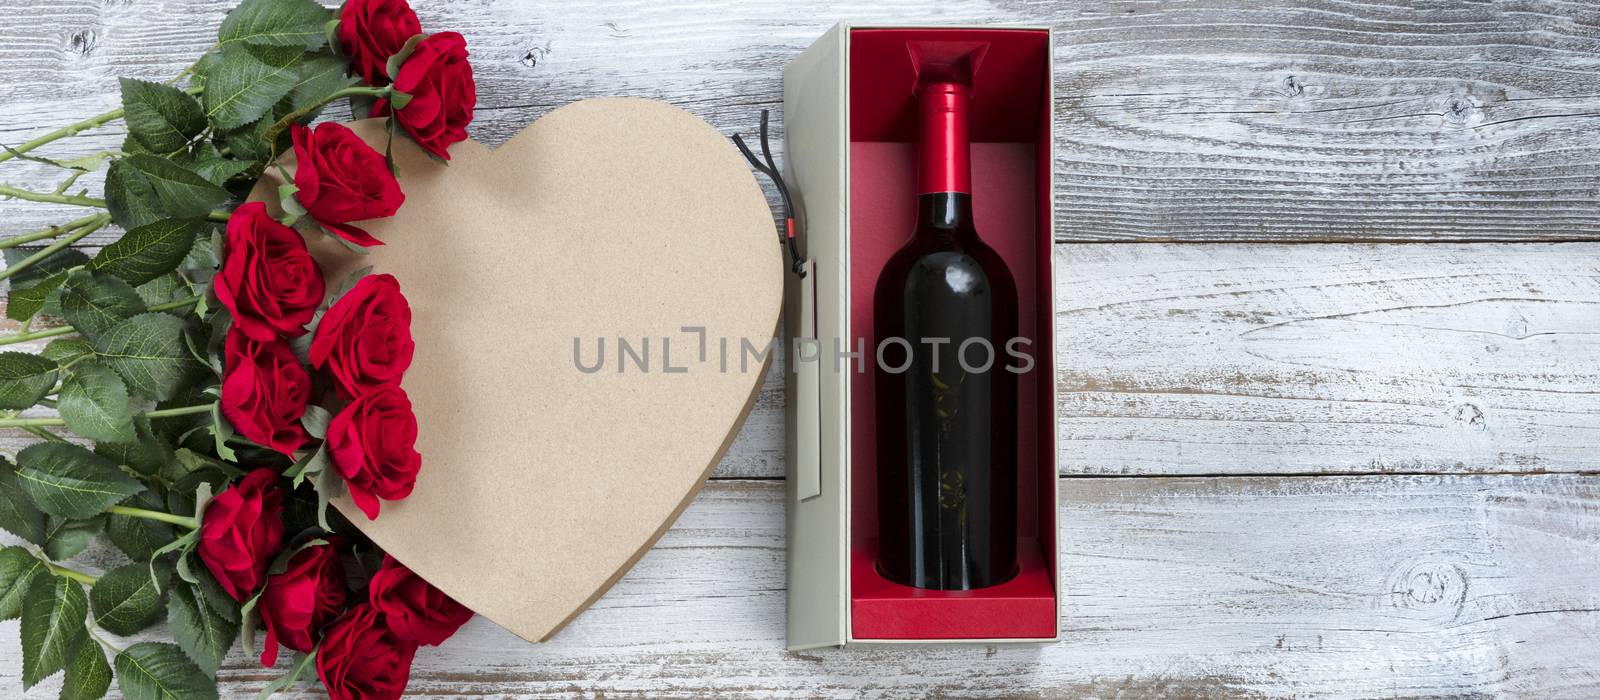 Happy Valentines Day celebration with wine, red roses and a heart shaped gift box on white rustic wood 